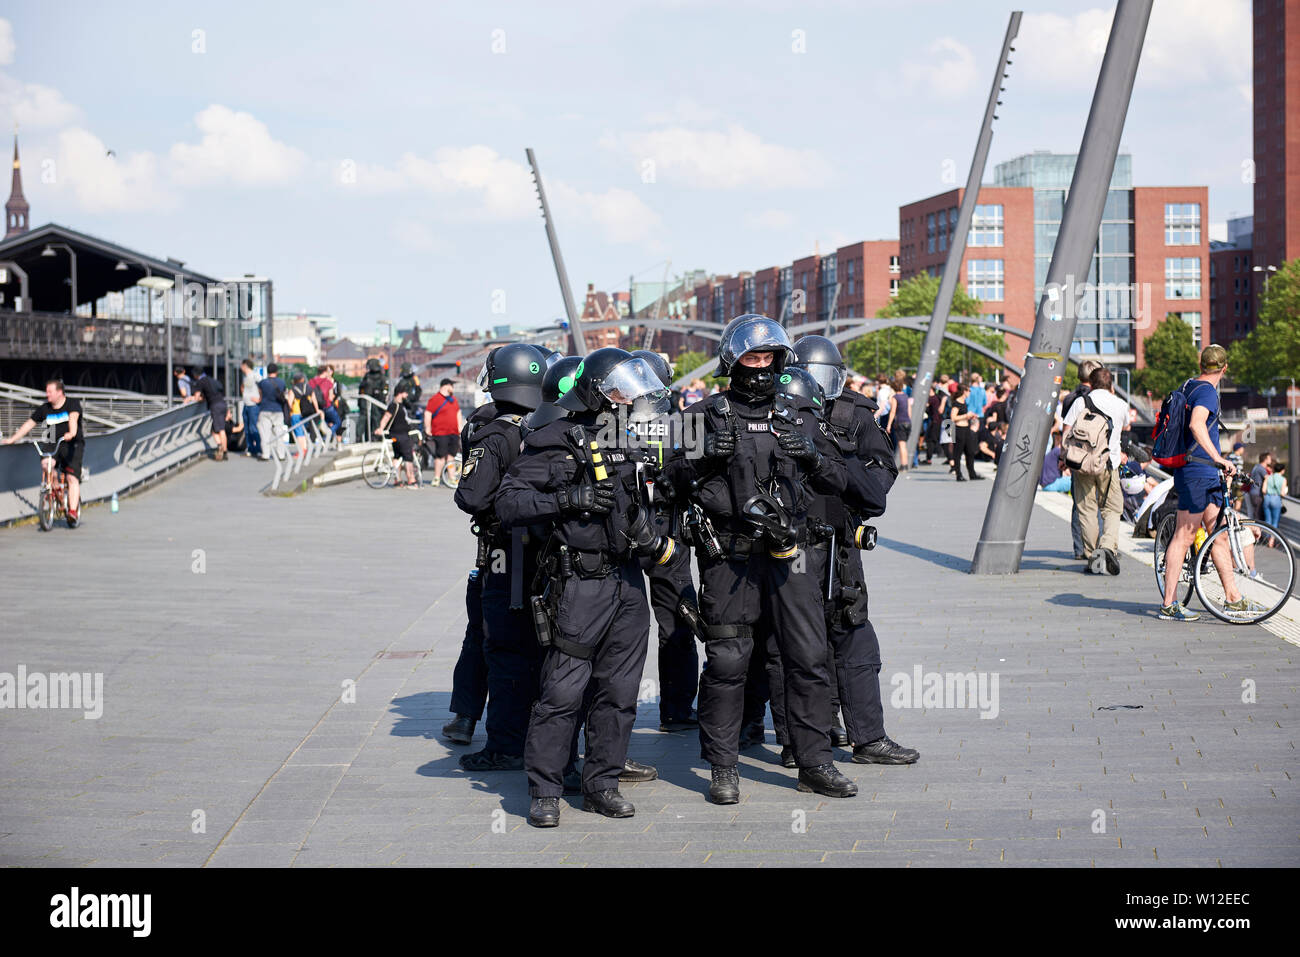 The 2017 G20 Hamburg summit was the twelfth meeting of the Group of Twenty (G20), which was held on 7–8 July 2017, at Hamburg Messe, in the city of Hamburg, Germany. The G20 summit was the main focus of German far left propaganda in 2017. More than 320 police officers were injured in the riots. Interior minister Horst Seehofer especially criticized that photos of police on duty during the summit were spread in the far left networks. Of the 1135 far-left violent incidents in that year in Germany, 832 occurred during the summit. Stock Photo